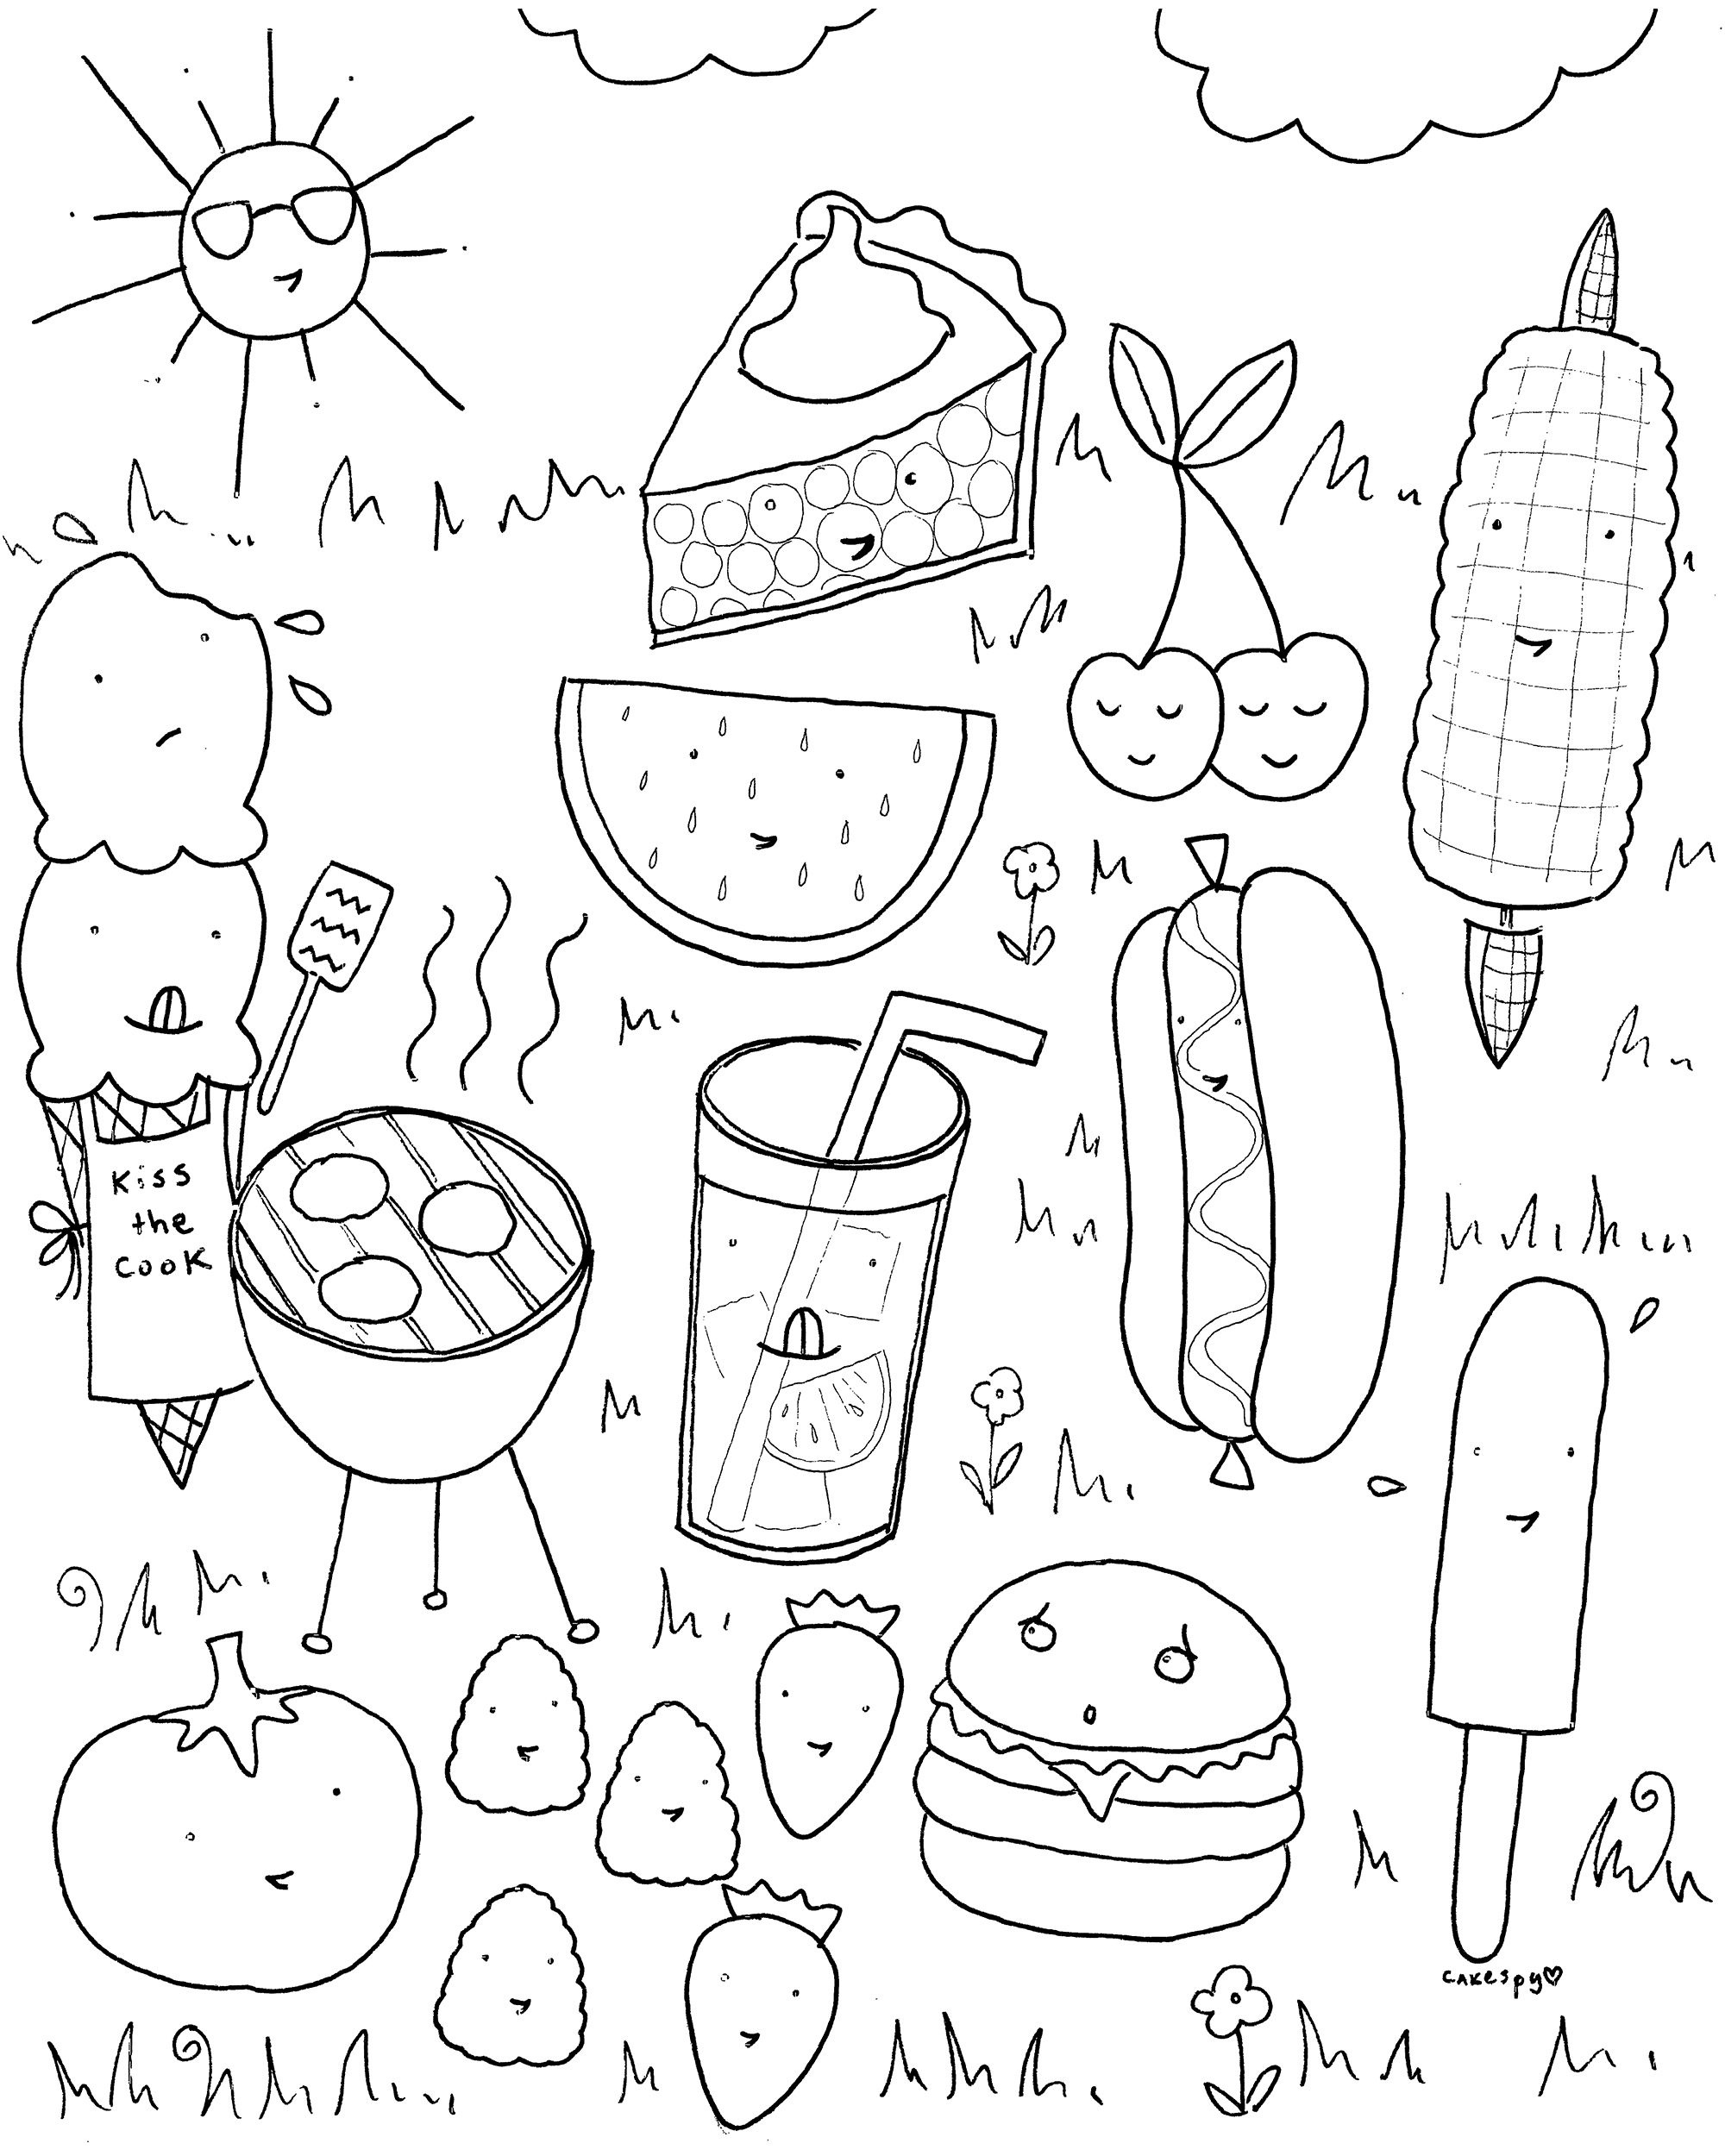 Free Downloadable Summer Fun Coloring Book Pages | Ideen Für Kinder - Free Printable Summer Coloring Pages For Adults